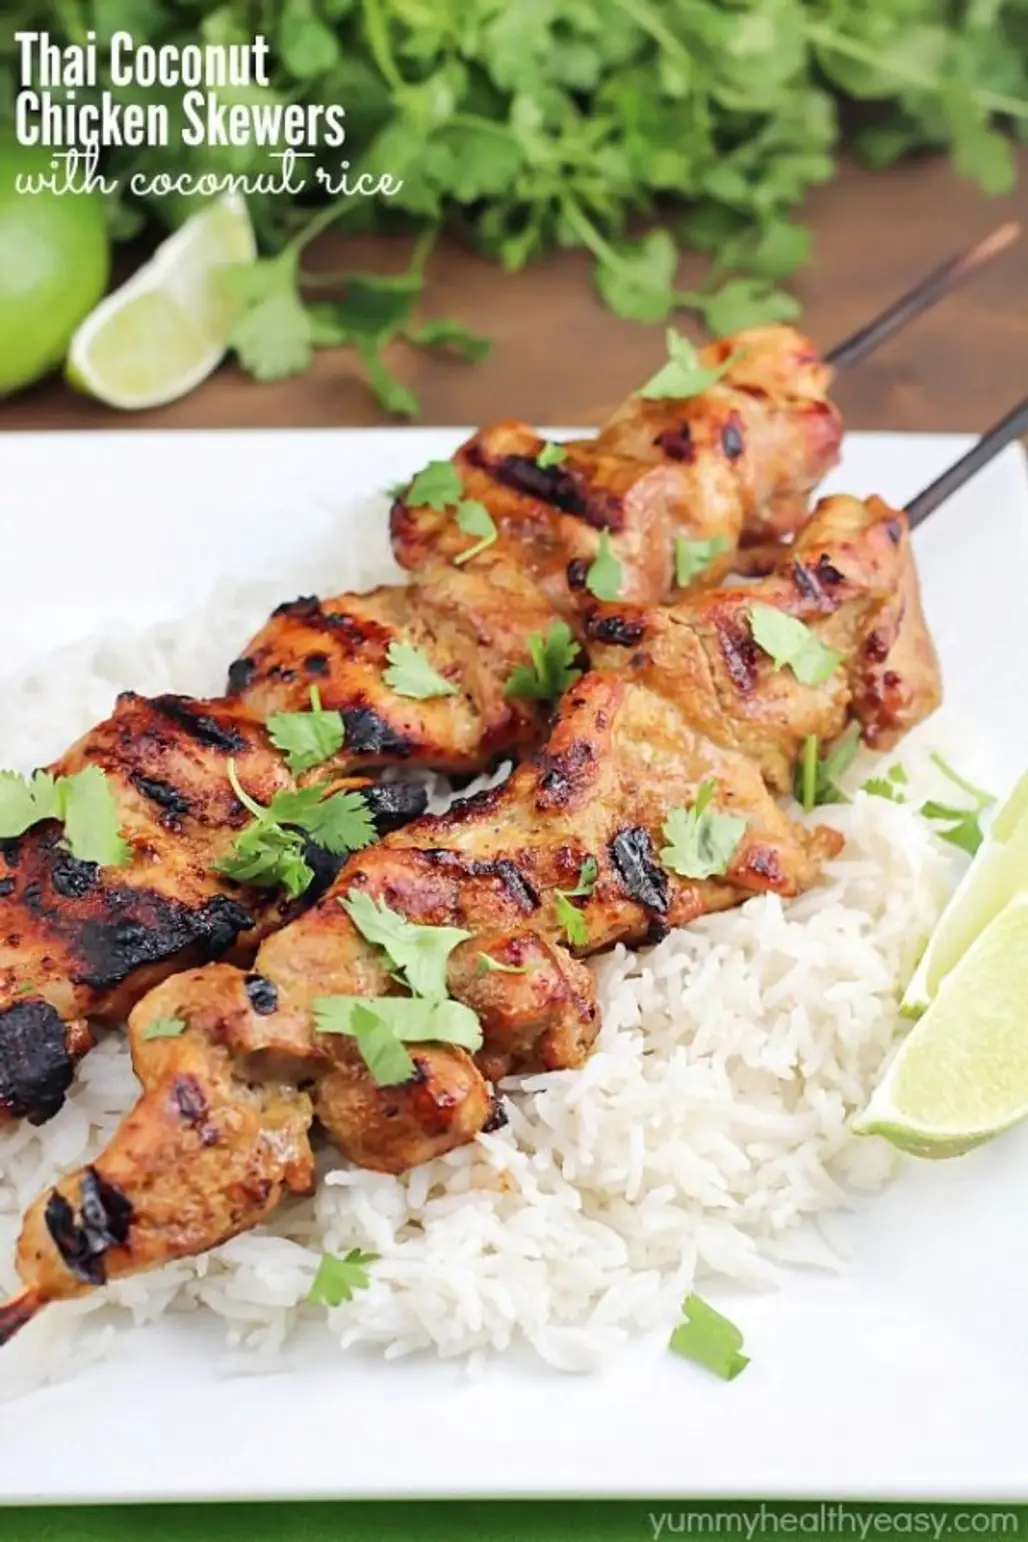 Marinated and Grilled Thai Coconut Chicken Skewers